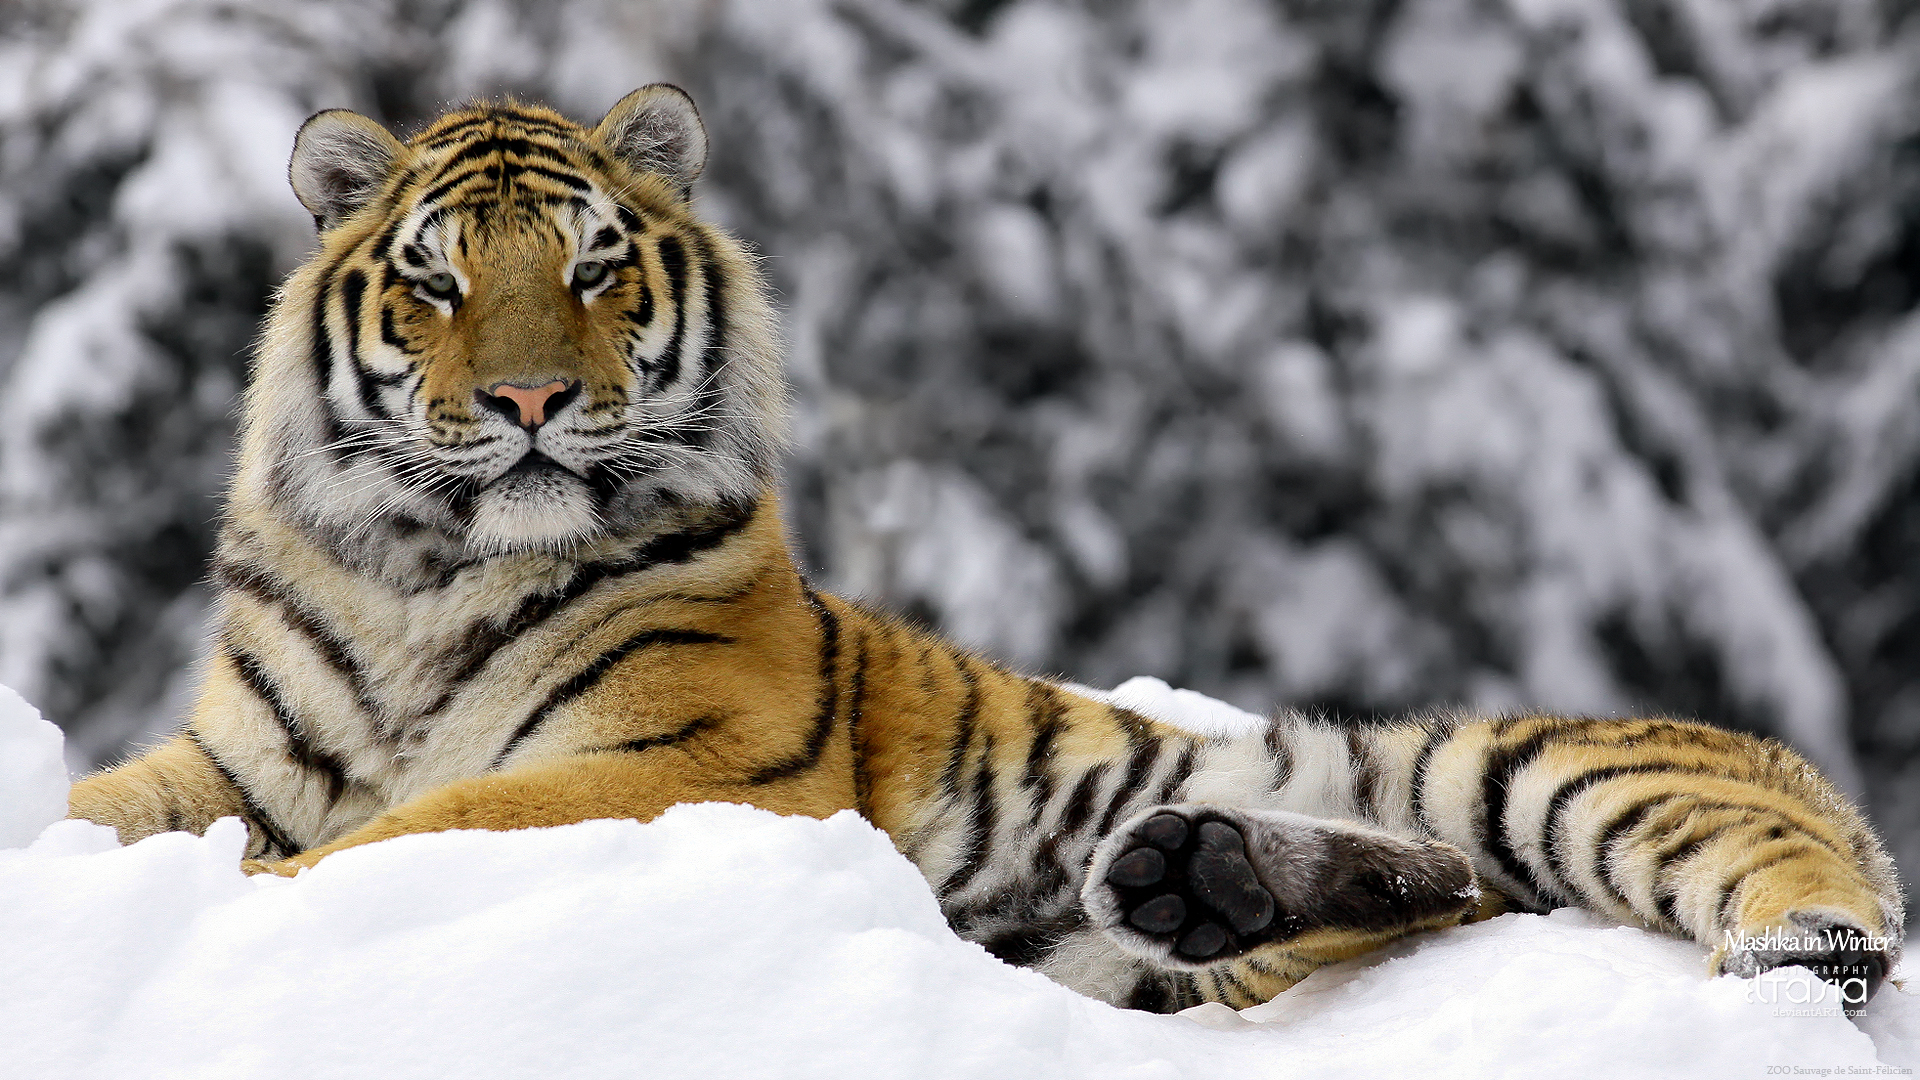 Tiger in Winter Wallpapers | HD Wallpapers | ID #9395